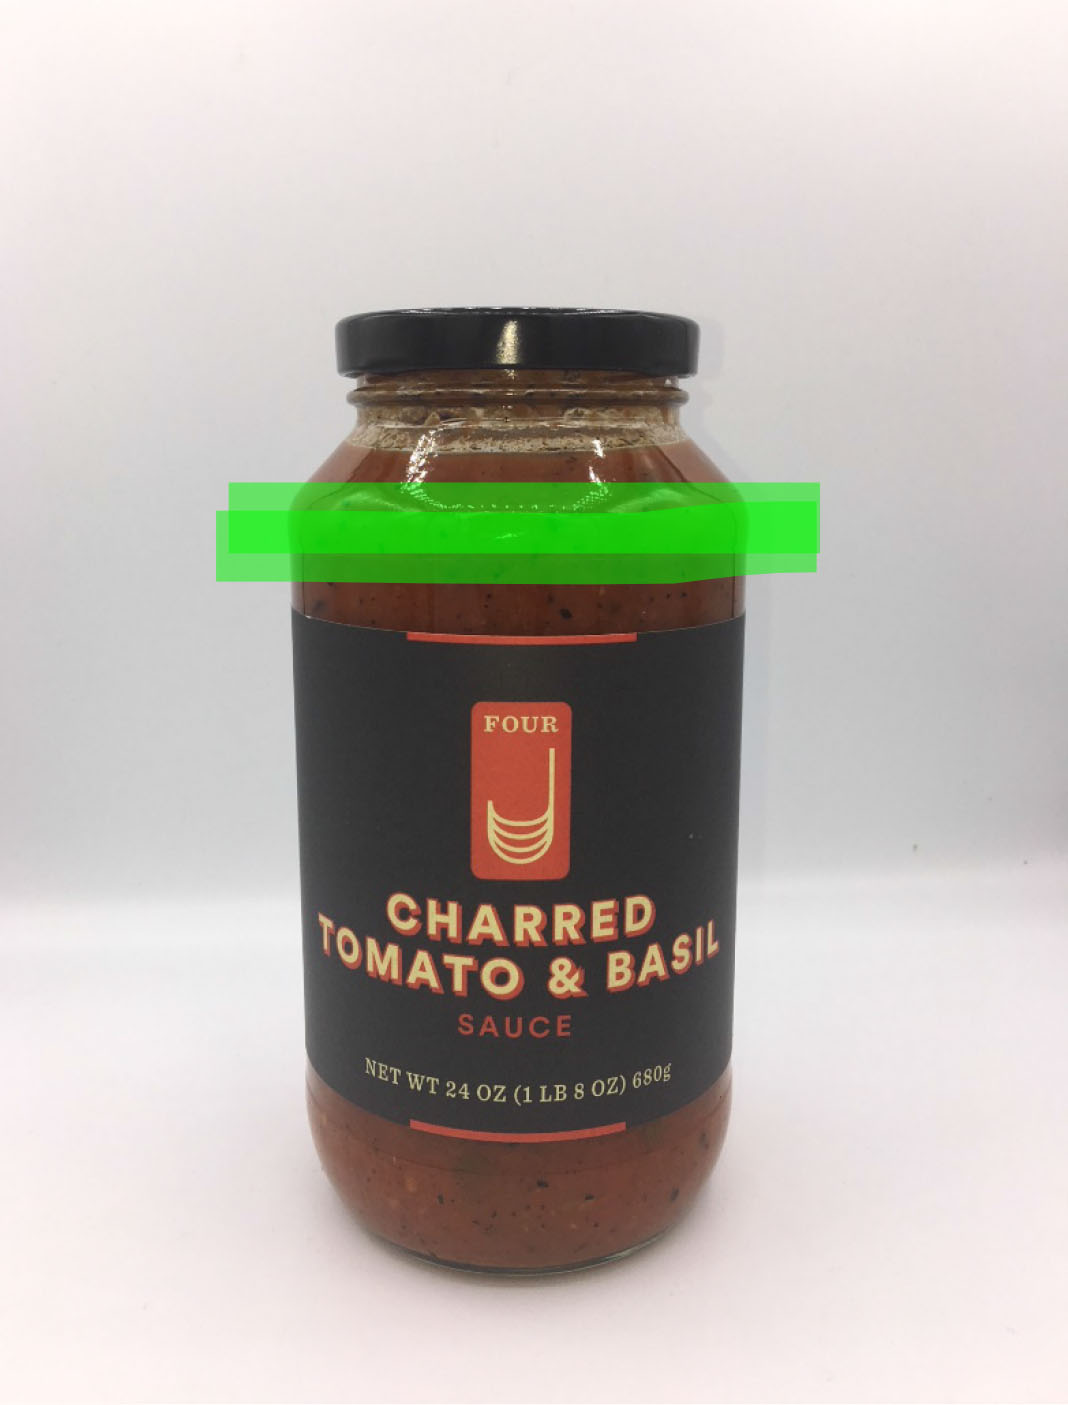 Cookwell & Company Issues Allergy Alert for Undeclared Soy, Wheat and Fish Allergen in Charred Tomato & Basil Sauce with a “Best By” Date of “10 Nov 18”